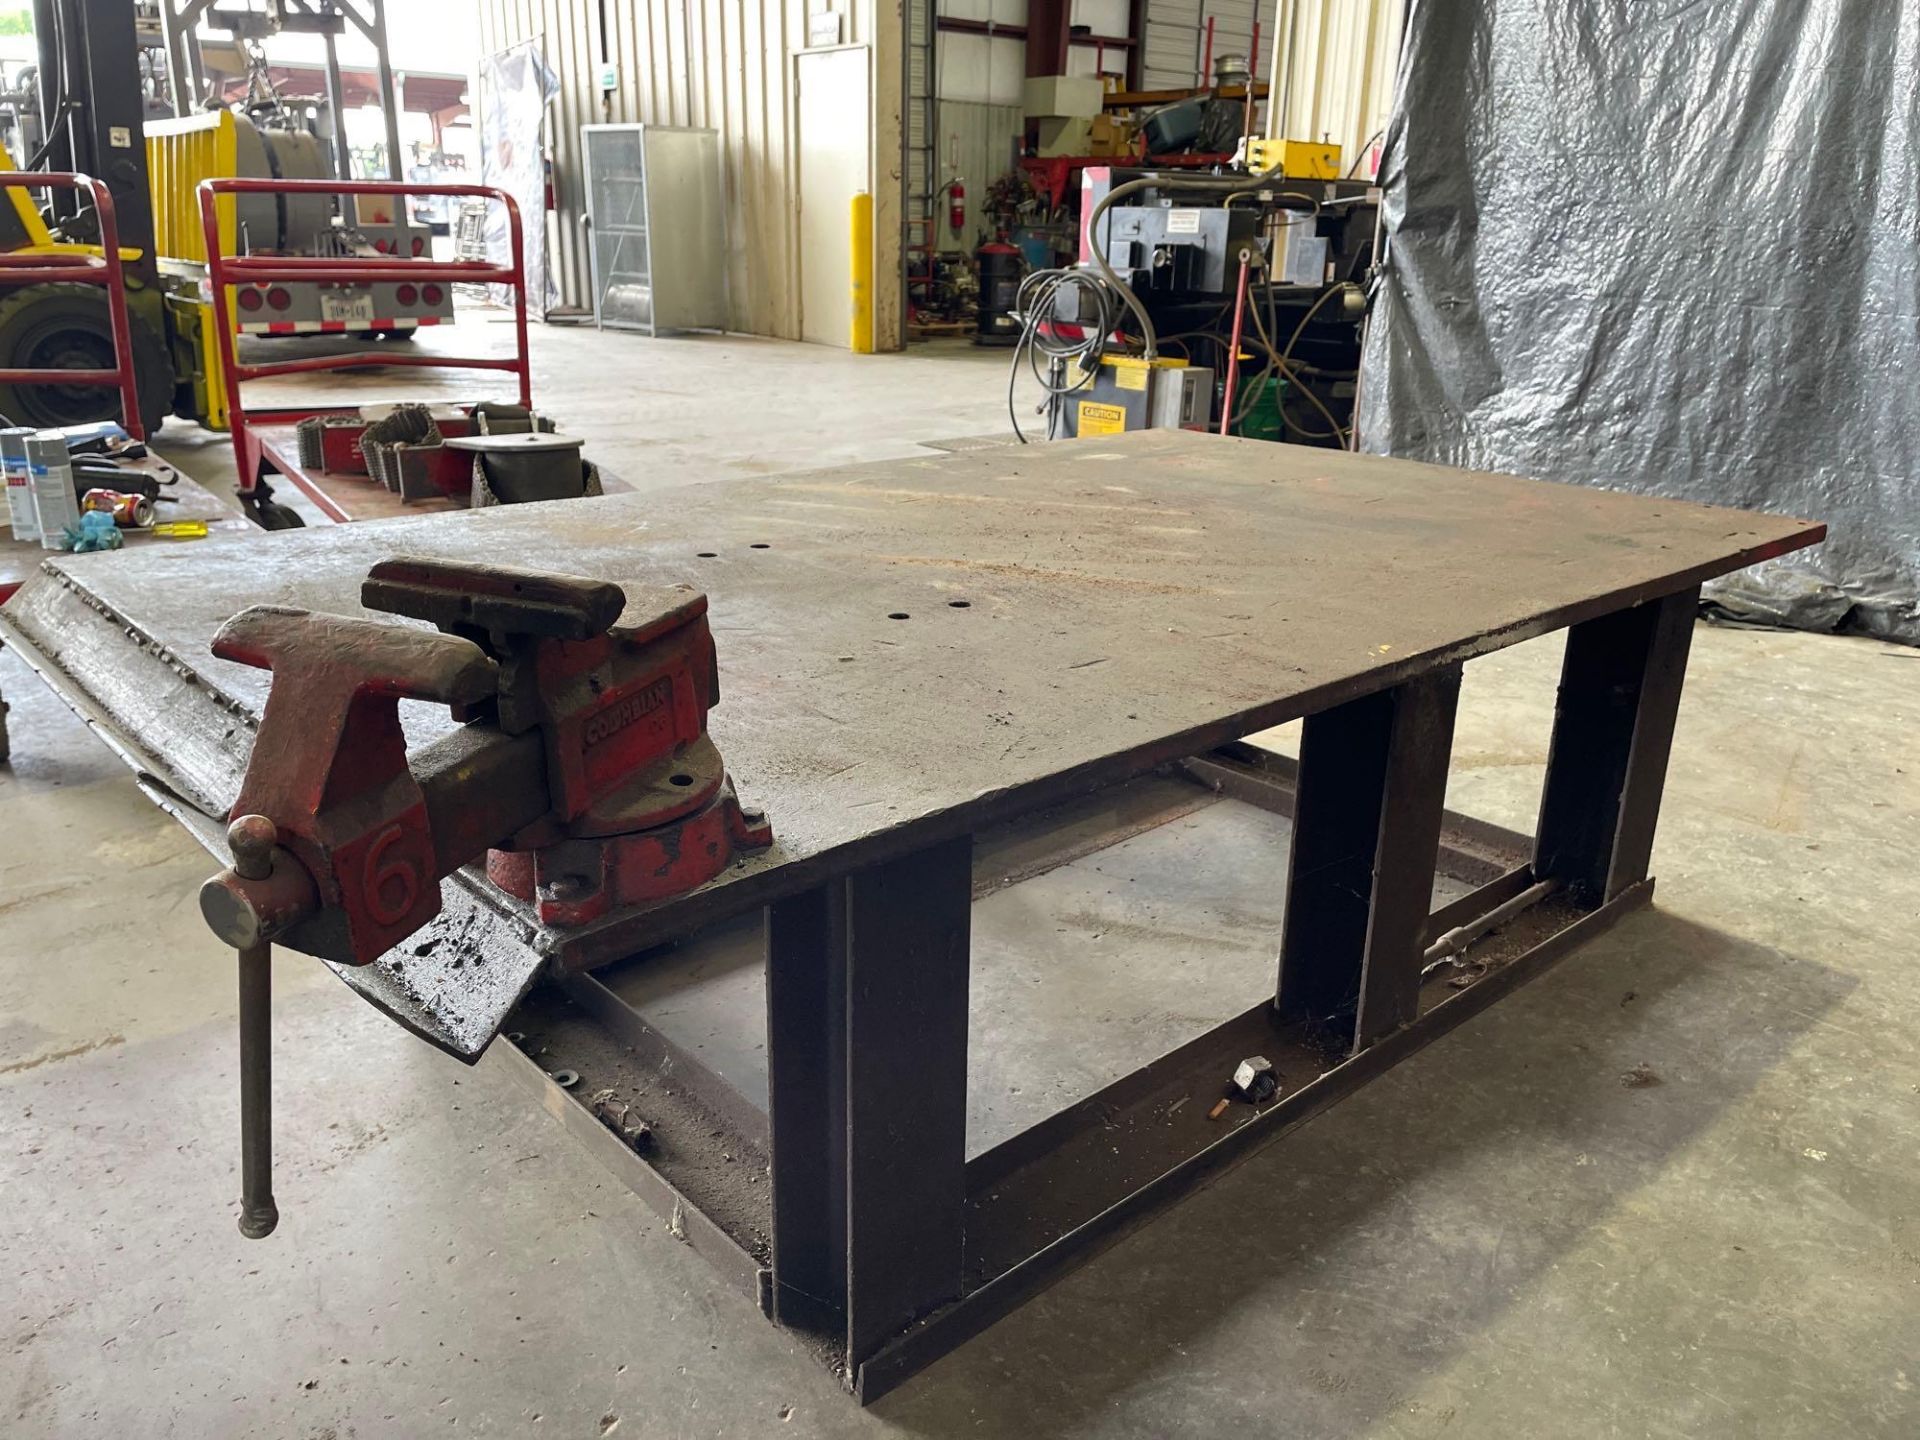 79" X 48" X 24" H.D. Welding Table with 6" Vise - Image 7 of 7